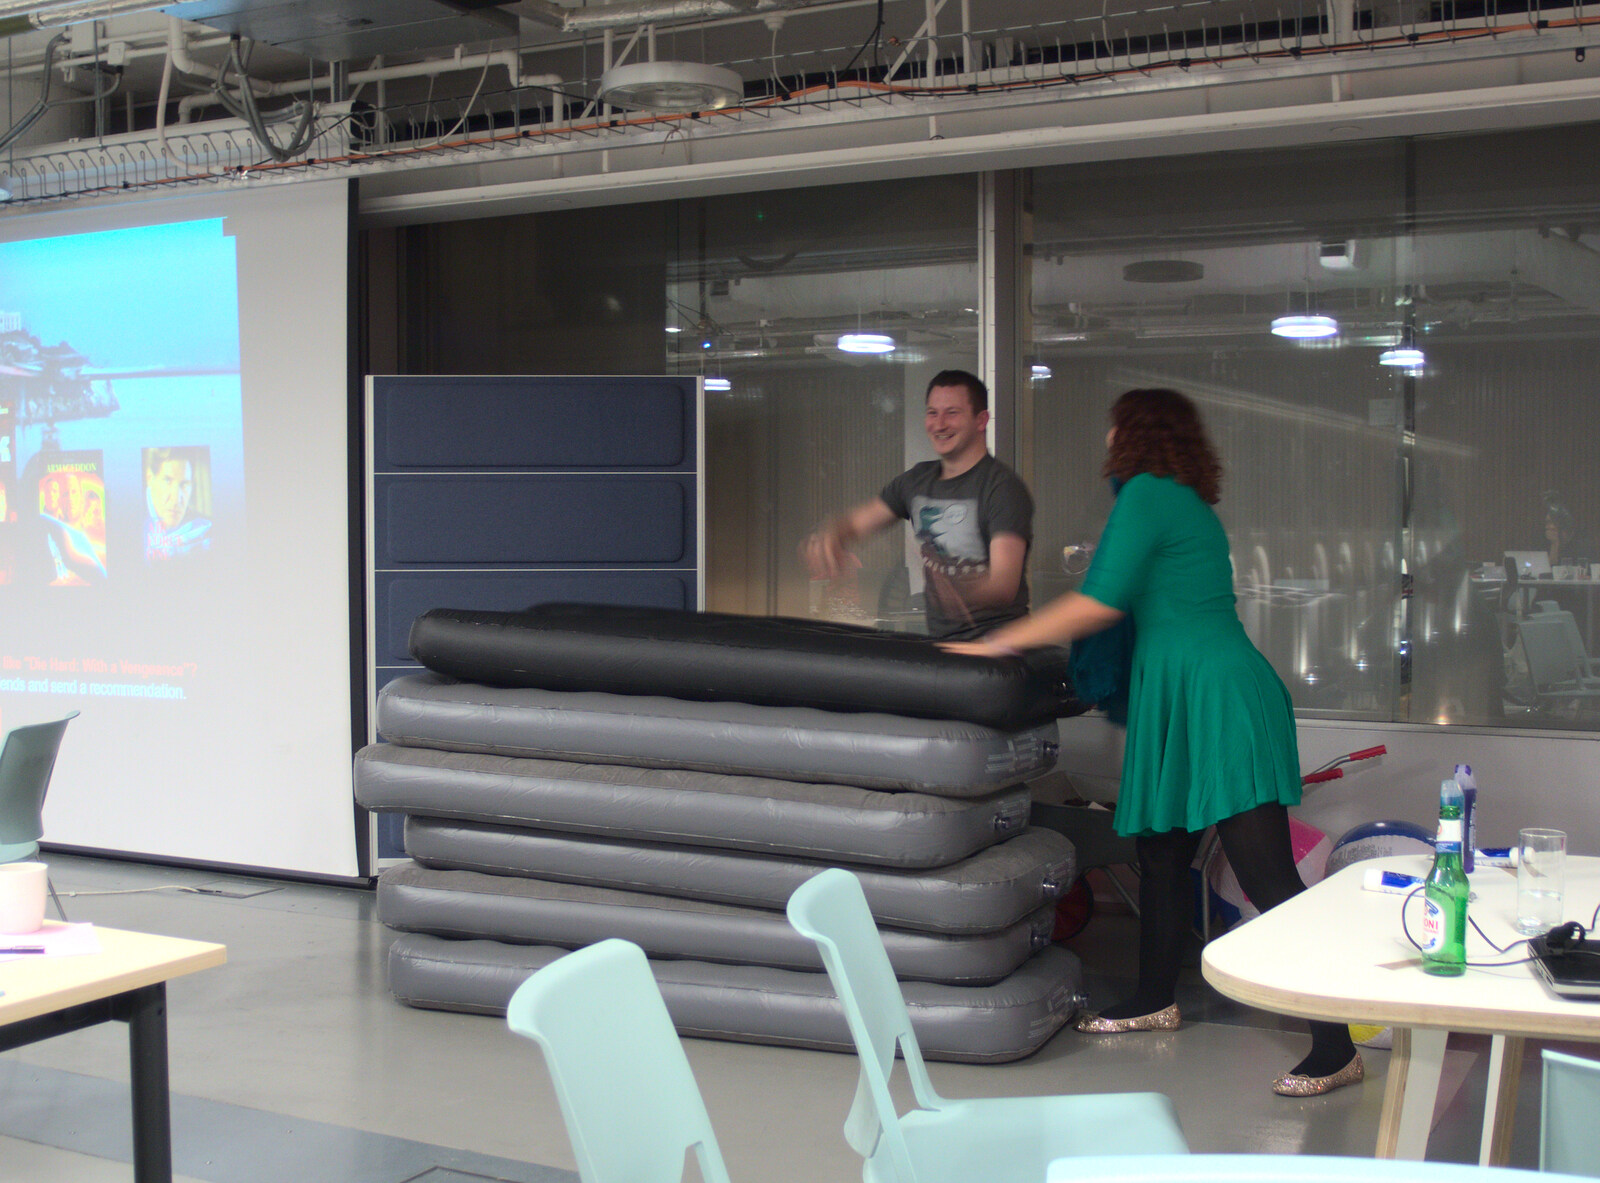 Joe and Charlie pile airbeds up from SwiftKey Innovation Nights, Westminster, London - 19th December 2014